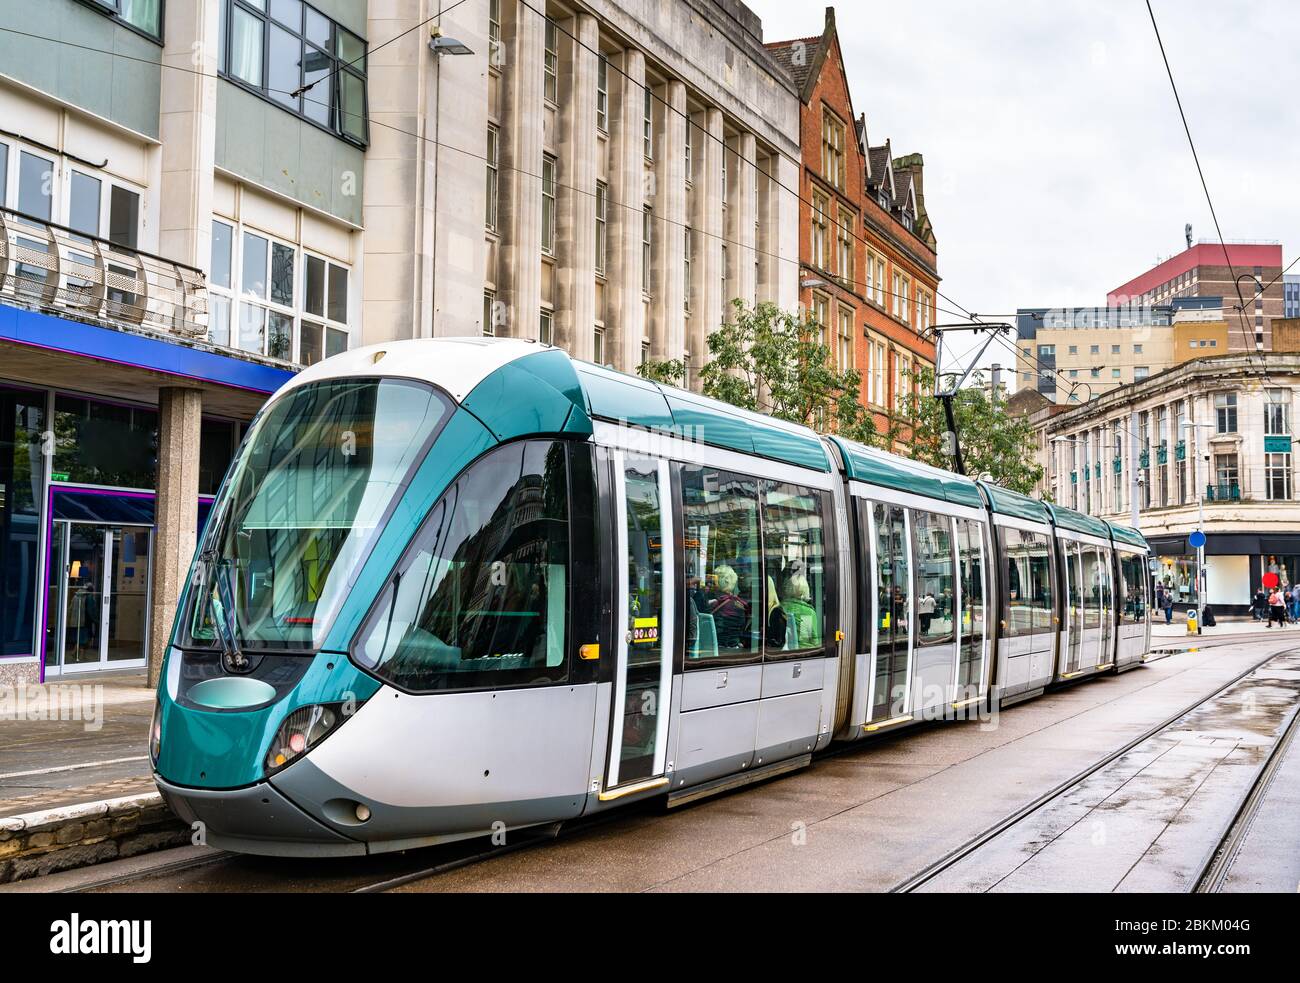 City tram at Old Market Square in Nottingham, England Stock Photo